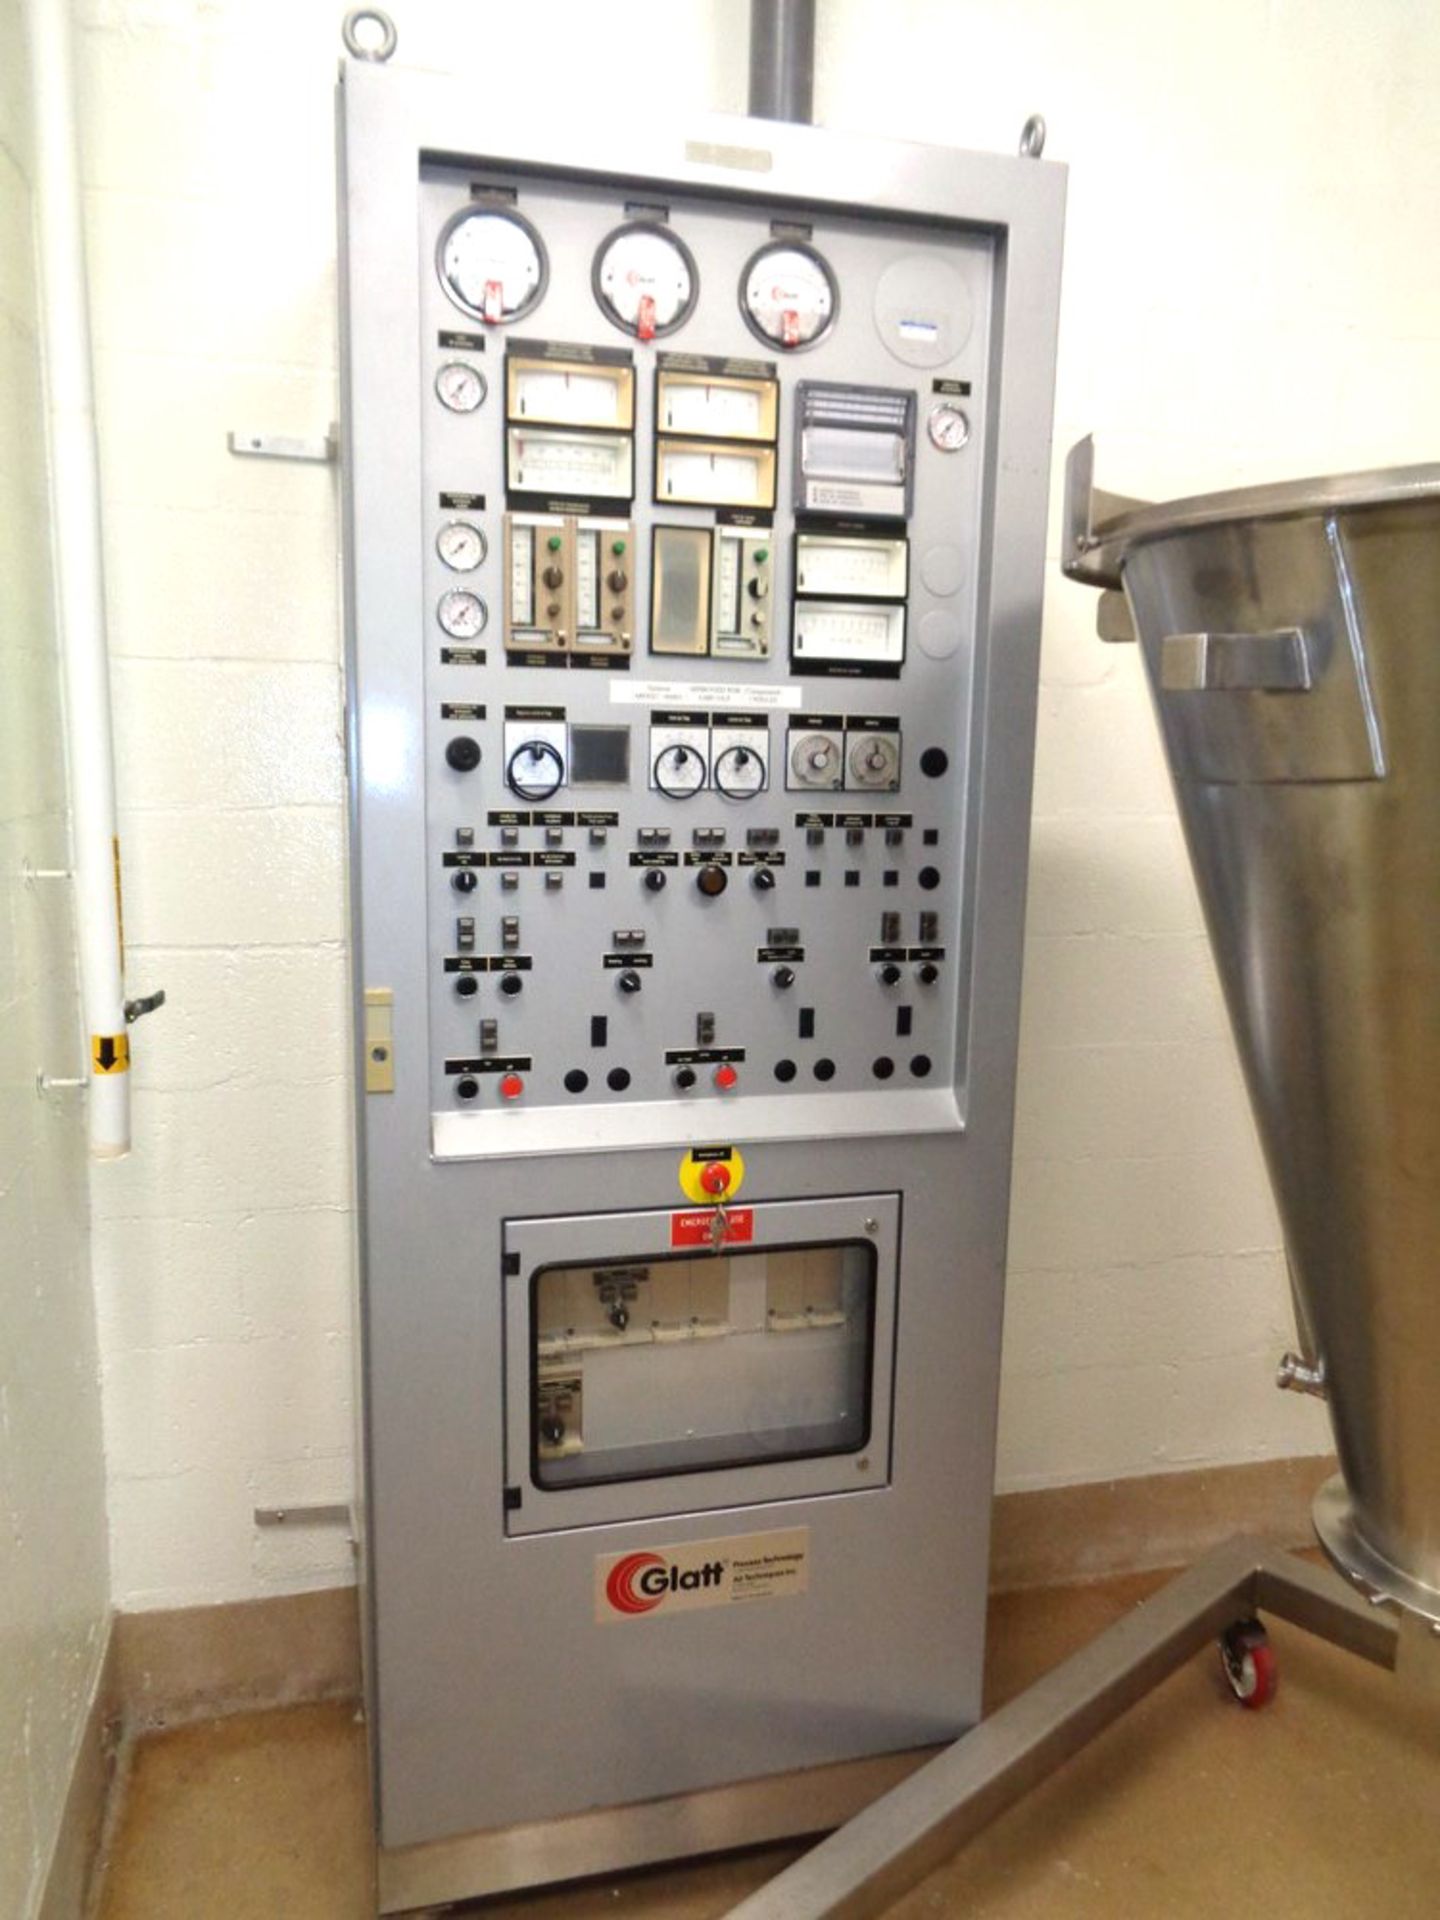 Glatt Fluid Bed Granulator with 9" Wurster, 22L and 45L Drying Inserts, Model GPCG-15, SN 5313. - Image 8 of 25